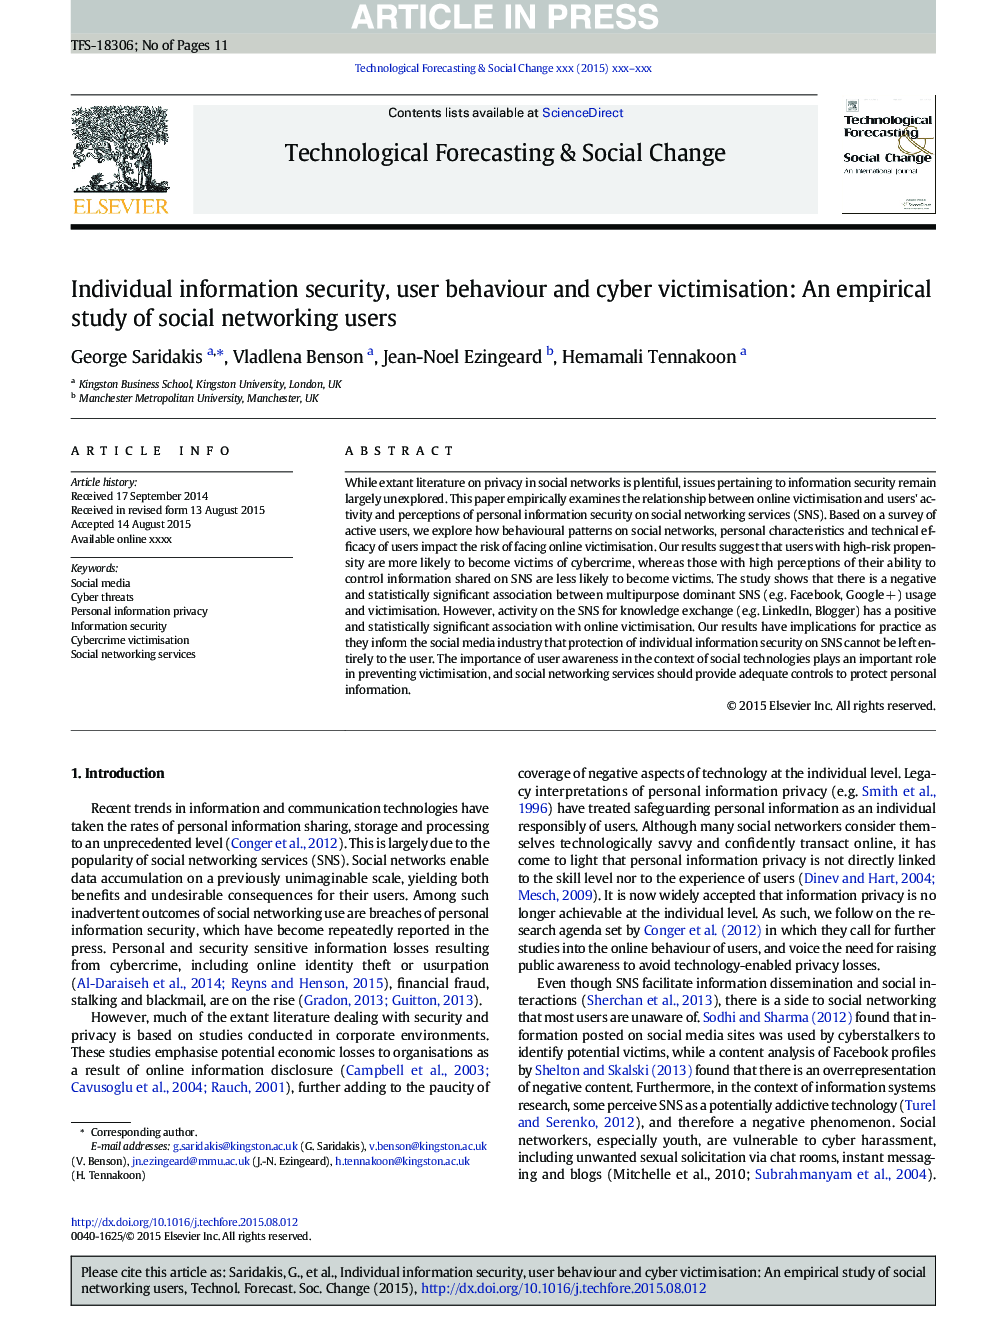 Individual information security, user behaviour and cyber victimisation: An empirical study of social networking users